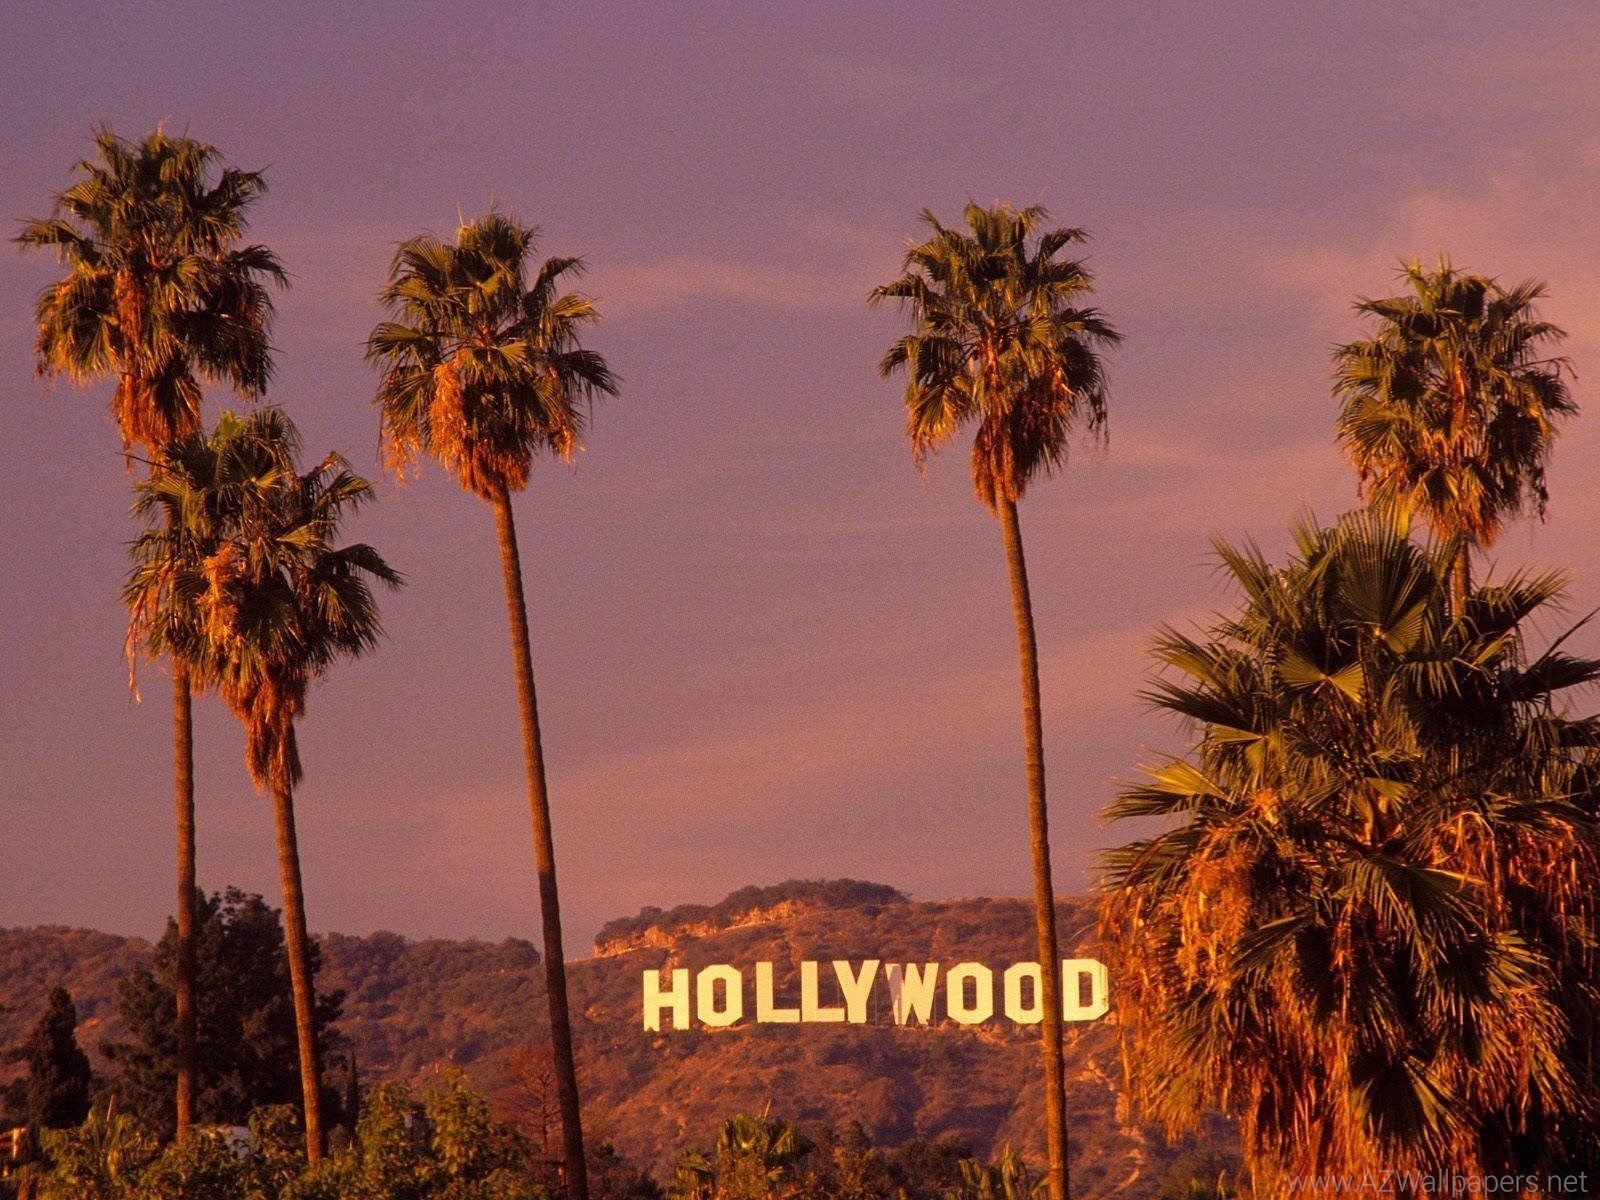 Hollywood Los Angeles Wallpaper Free Hollywood Los Angeles Background